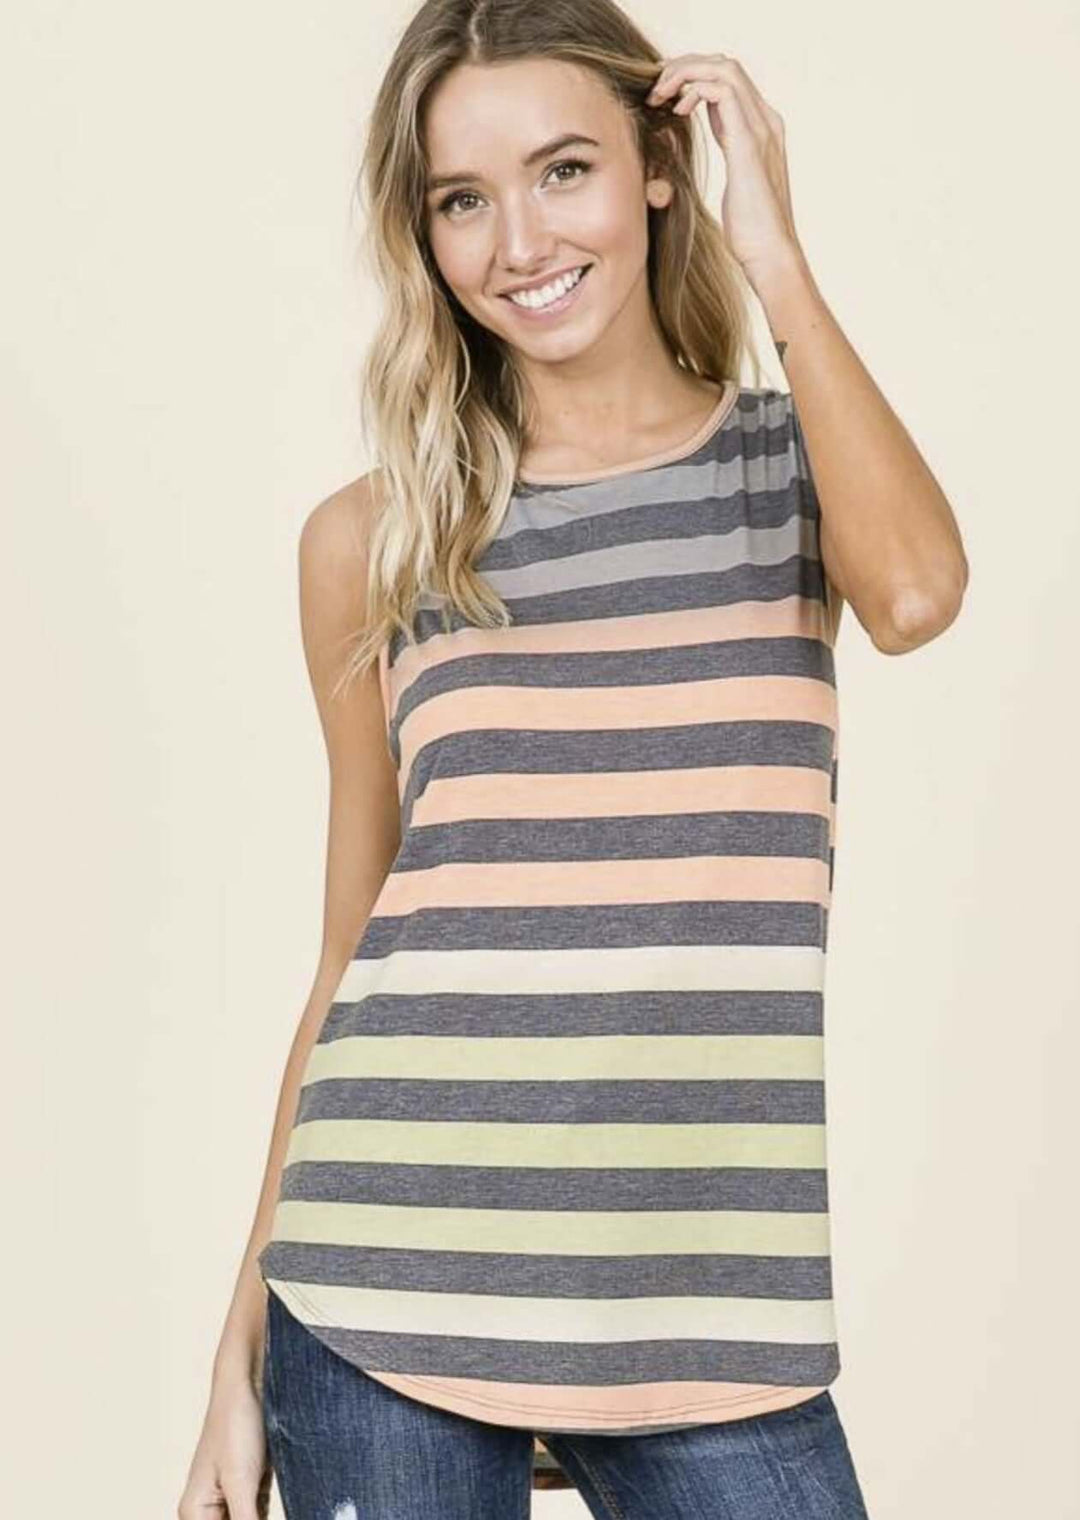 Made in USA Ladies Sleeveless Casual Top, Striped Detail, Round Neckline, Longer Length, Rounded Hem in Auburn Sunset Hues | Classy Cozy Cool Made in America Boutique